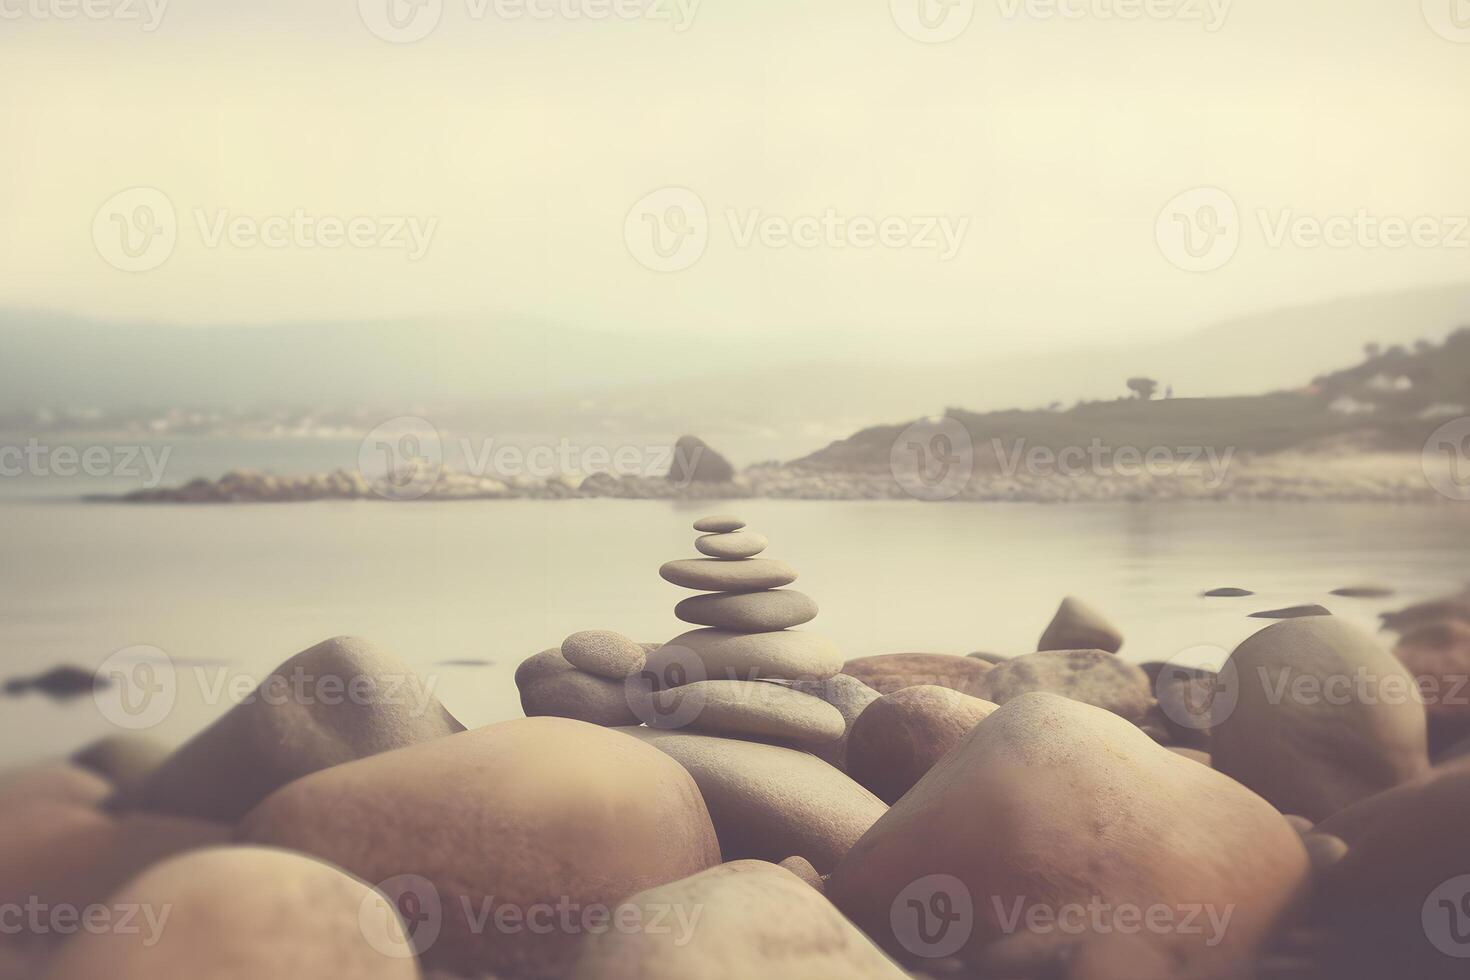 Pyramid stones balance on the sand of the beach. The object is in focus, the background is blurred. Neural network photo